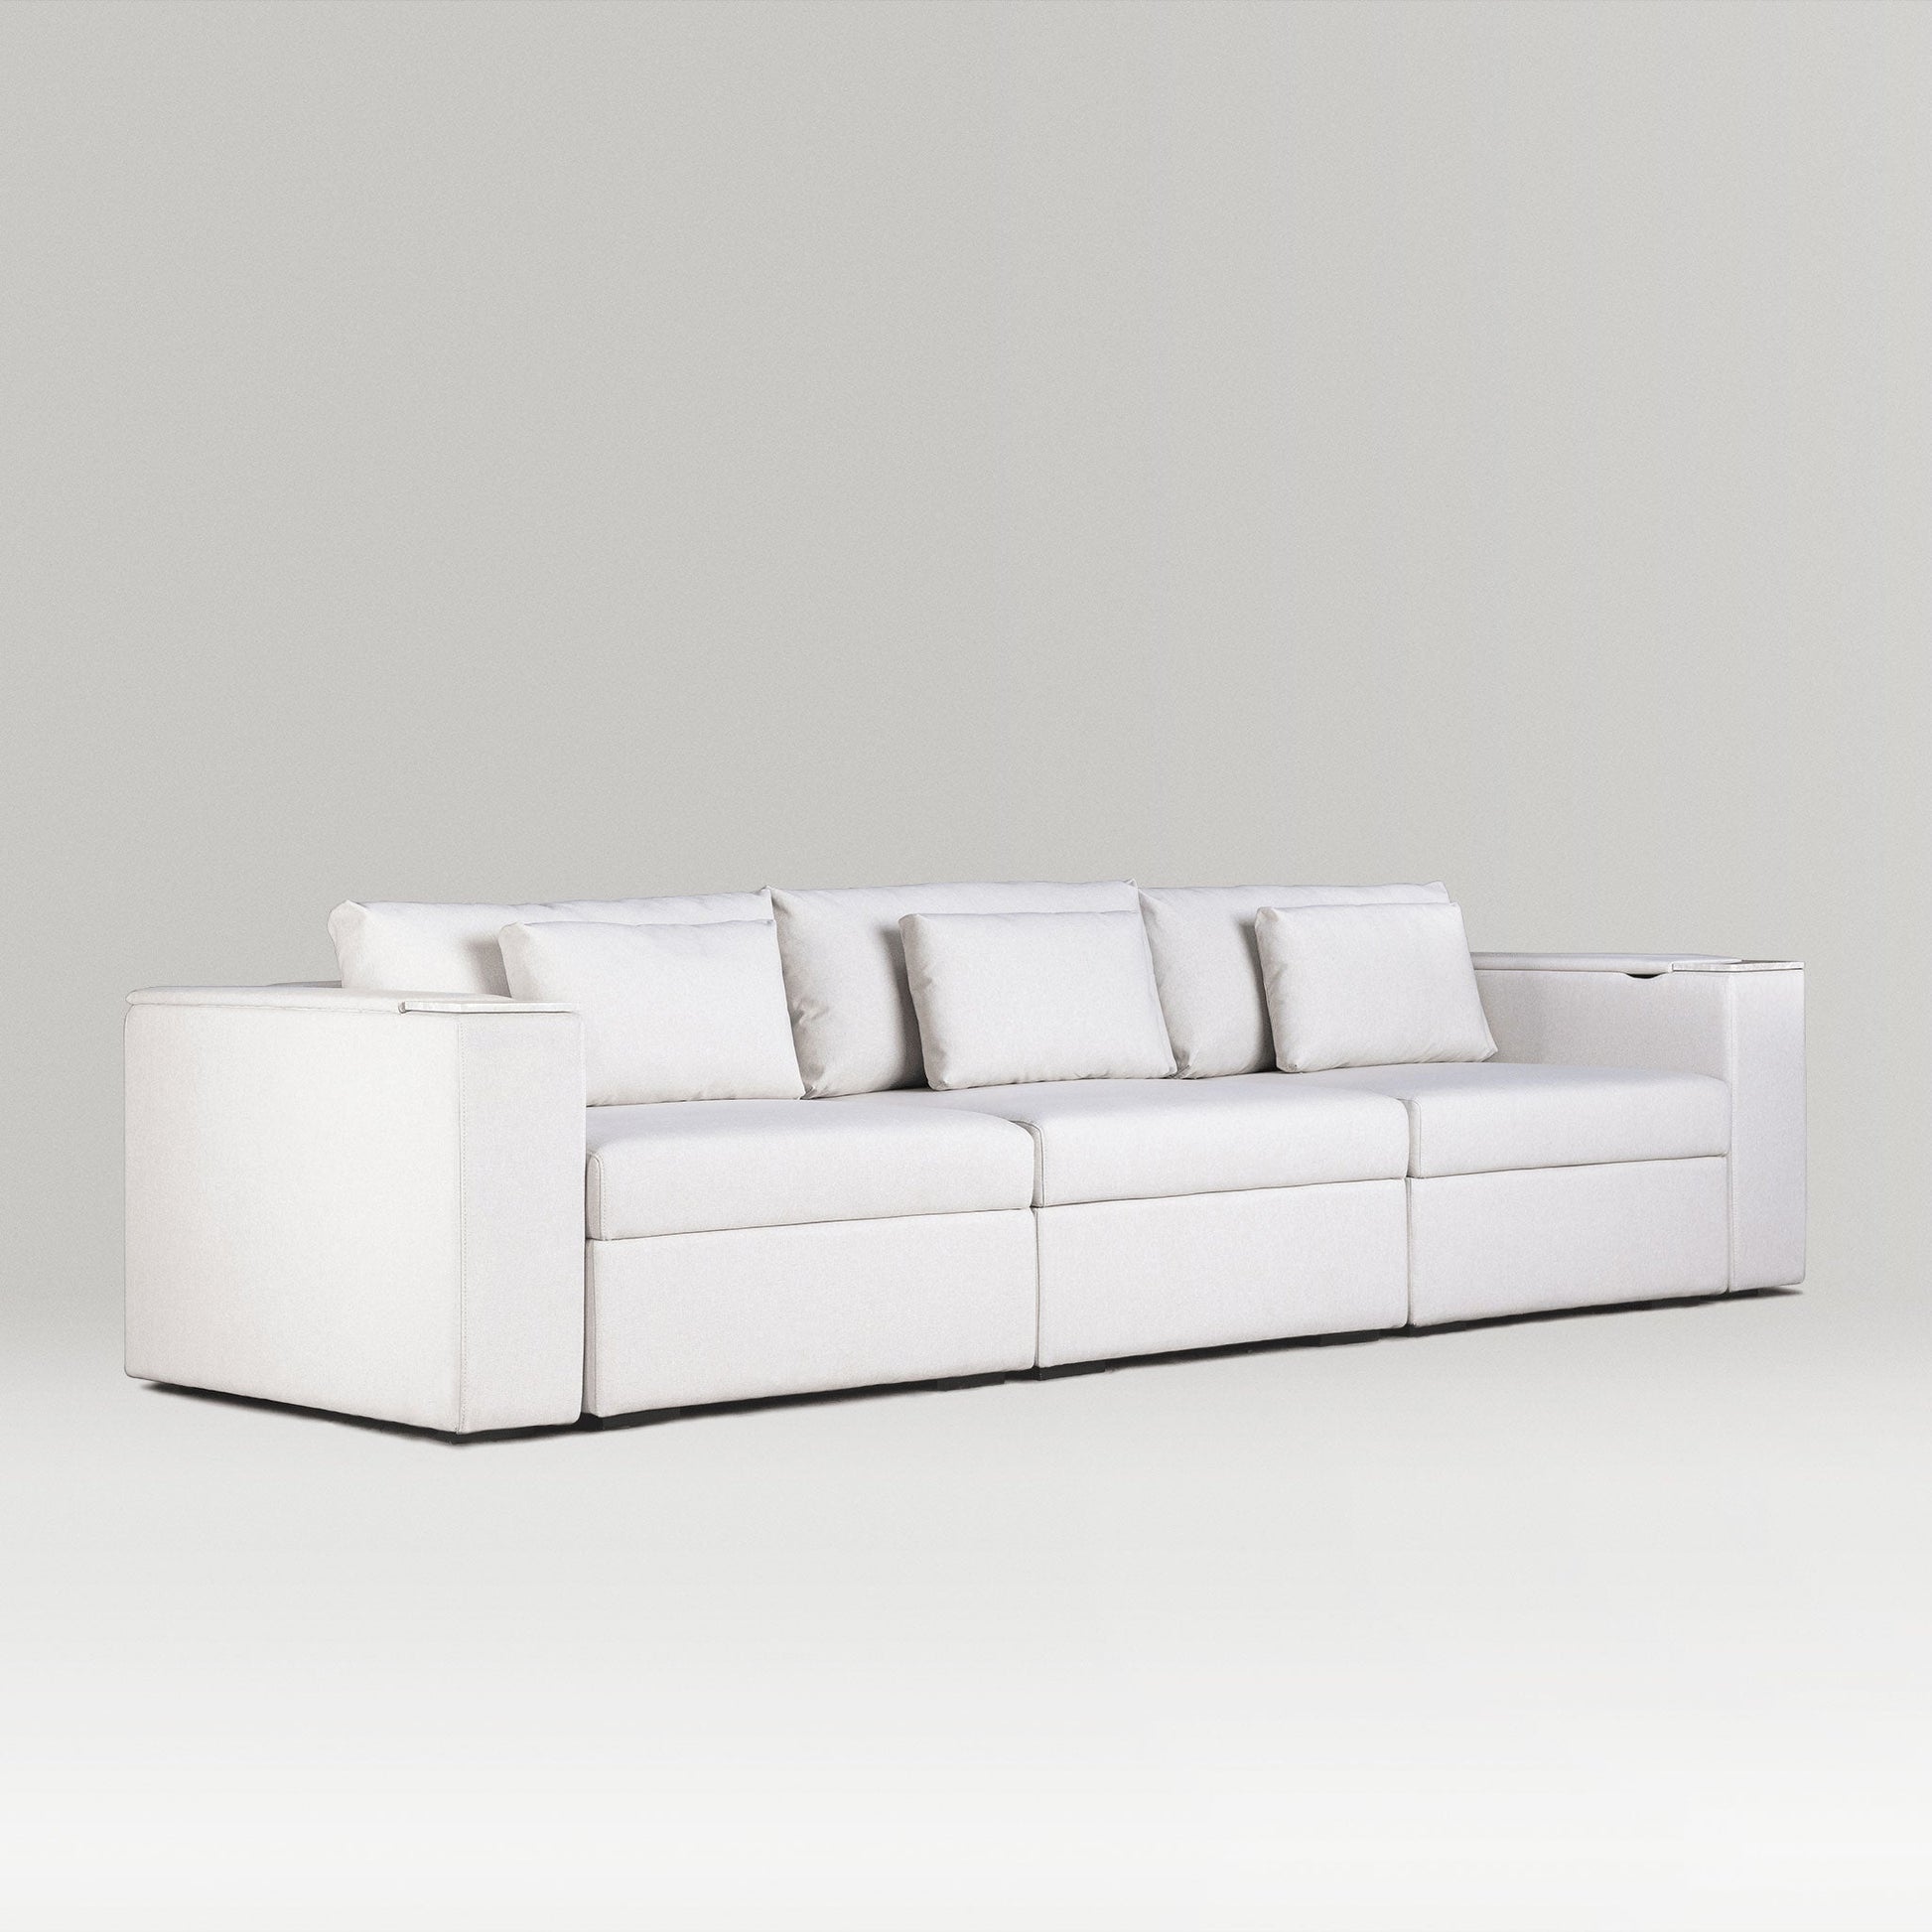  Rezy Design Sofa Store's Three-Seater Sectional Smart Sofa designed to furnish homes.